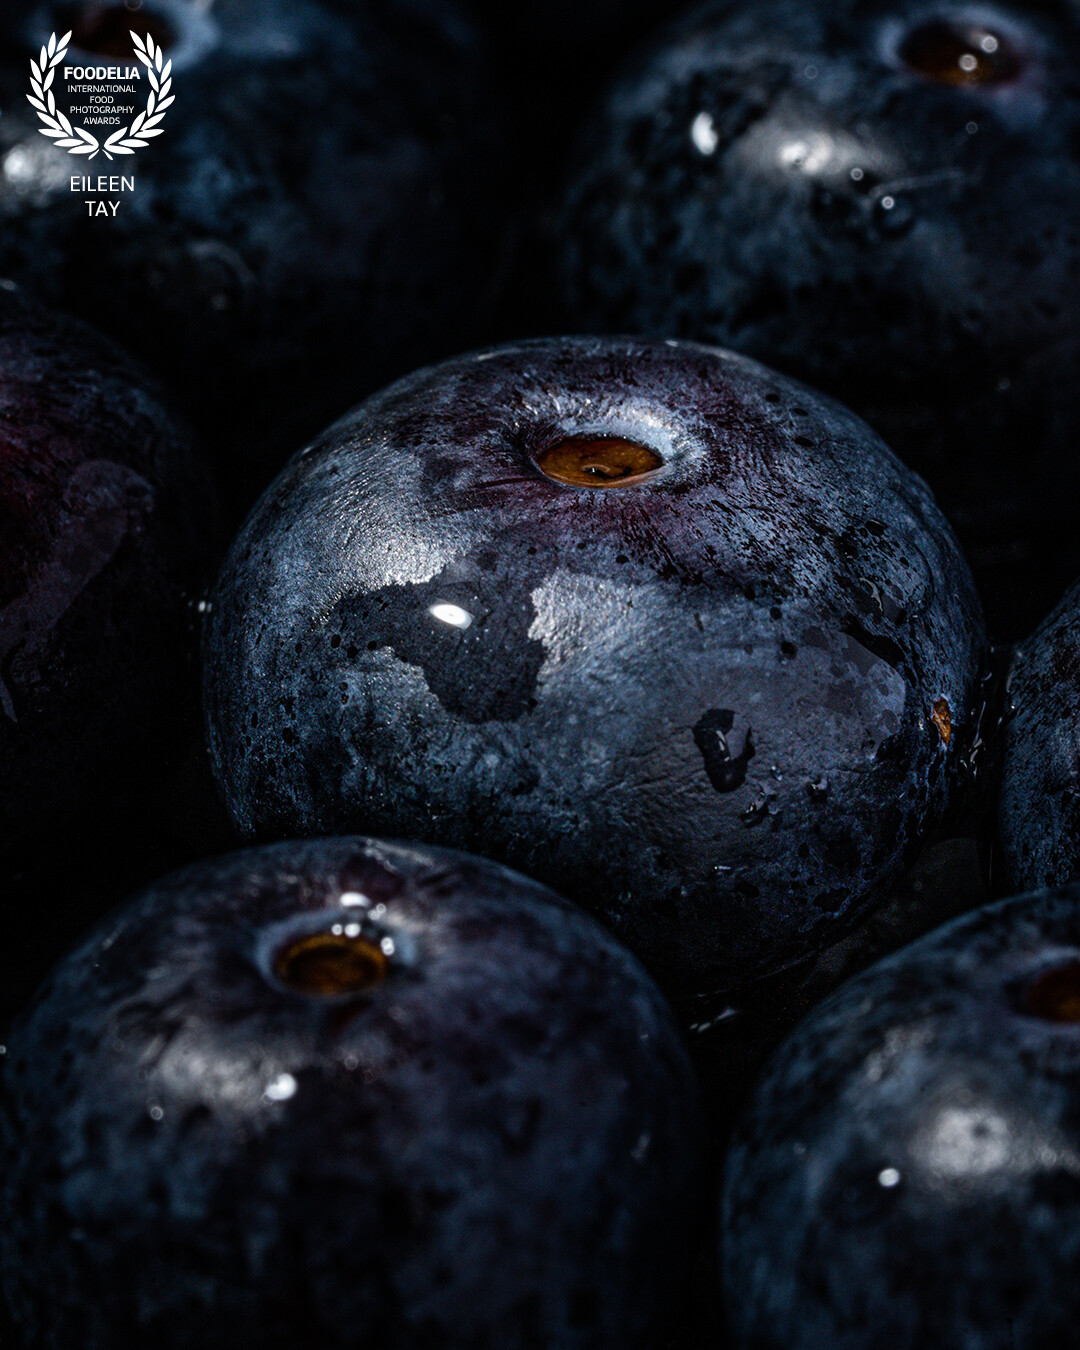 The goal is to capture the enticing details of the blueberries that evoke a sense of freshness and mouth-watering appeal.